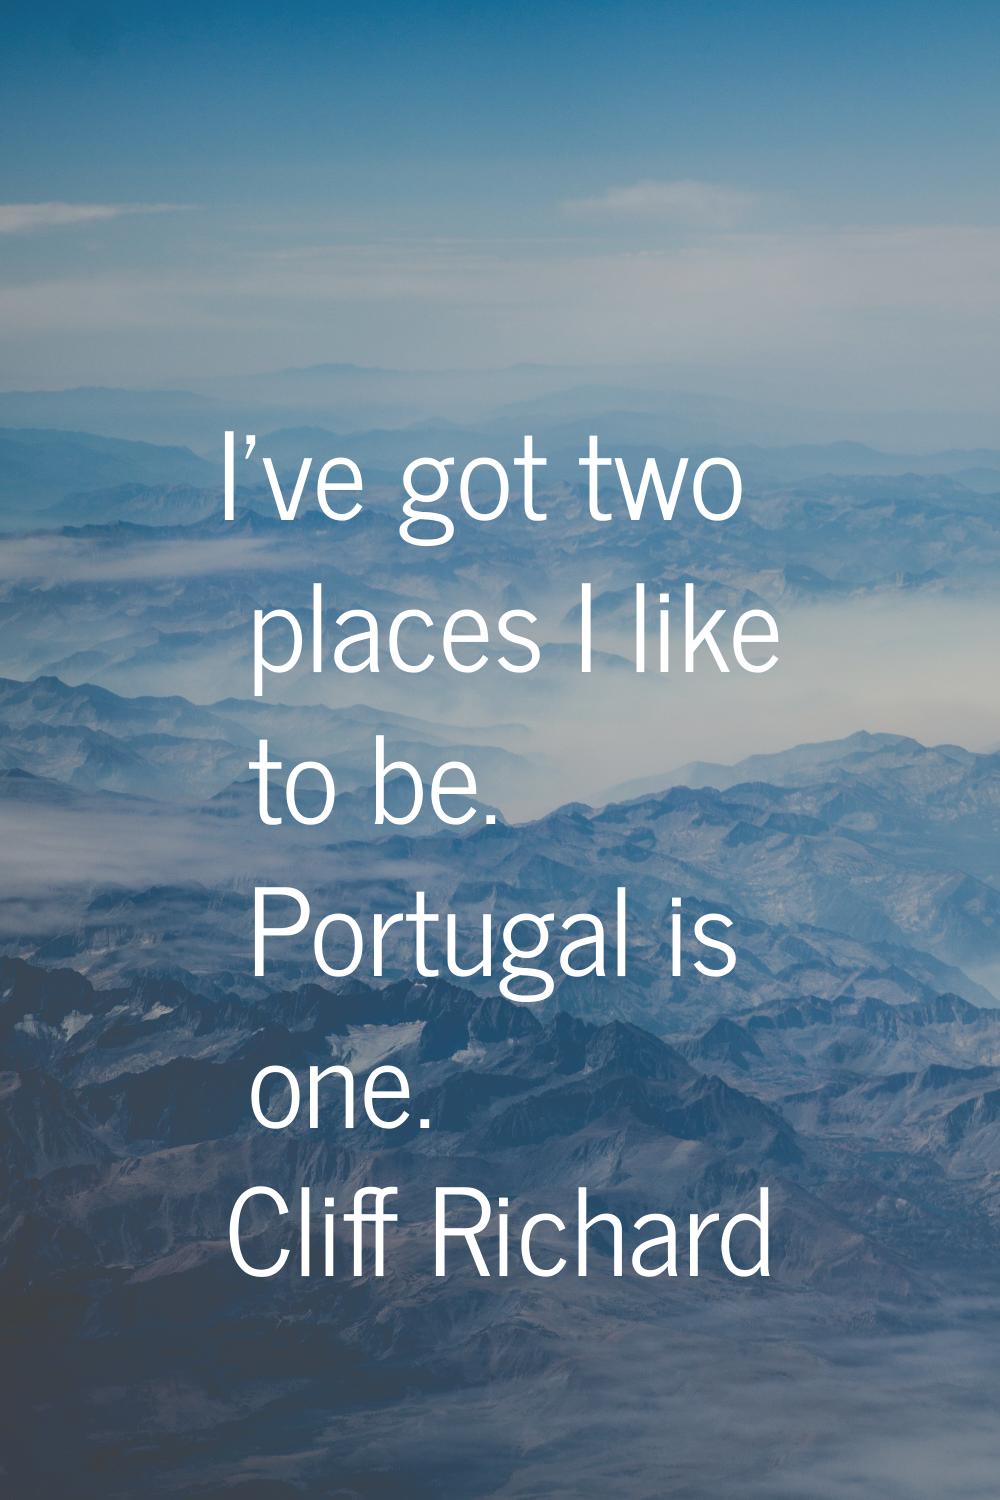 I've got two places I like to be. Portugal is one.